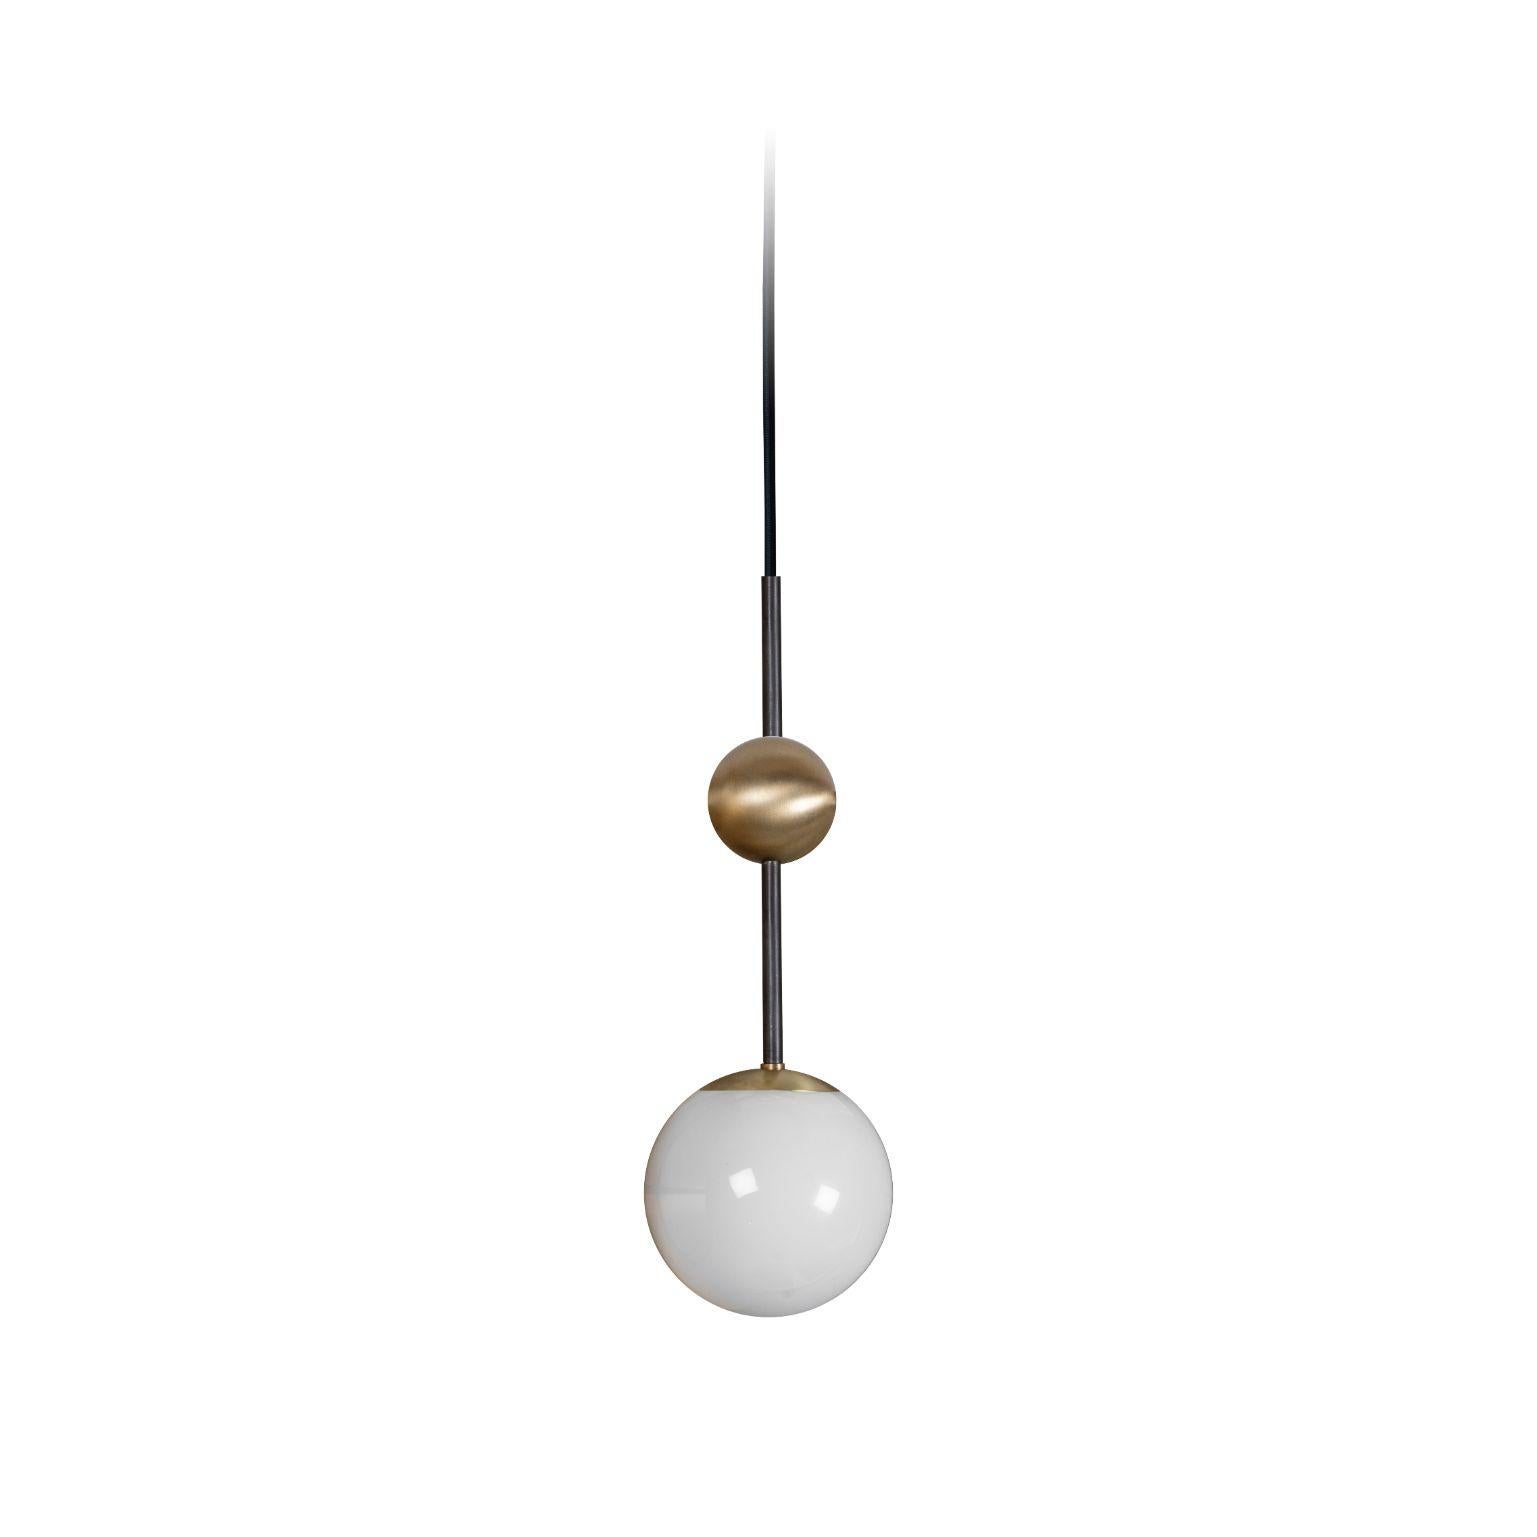 Rift pendant light by Bert Frank
Dimensions: 36.5 x 12.5 cm
Materials: Brushed brass, dark bronze detail, opal glass

When Adam Yeats and Robbie Llewellyn founded Bert Frank in 2013 it was a meeting of minds and the start of a collaborative